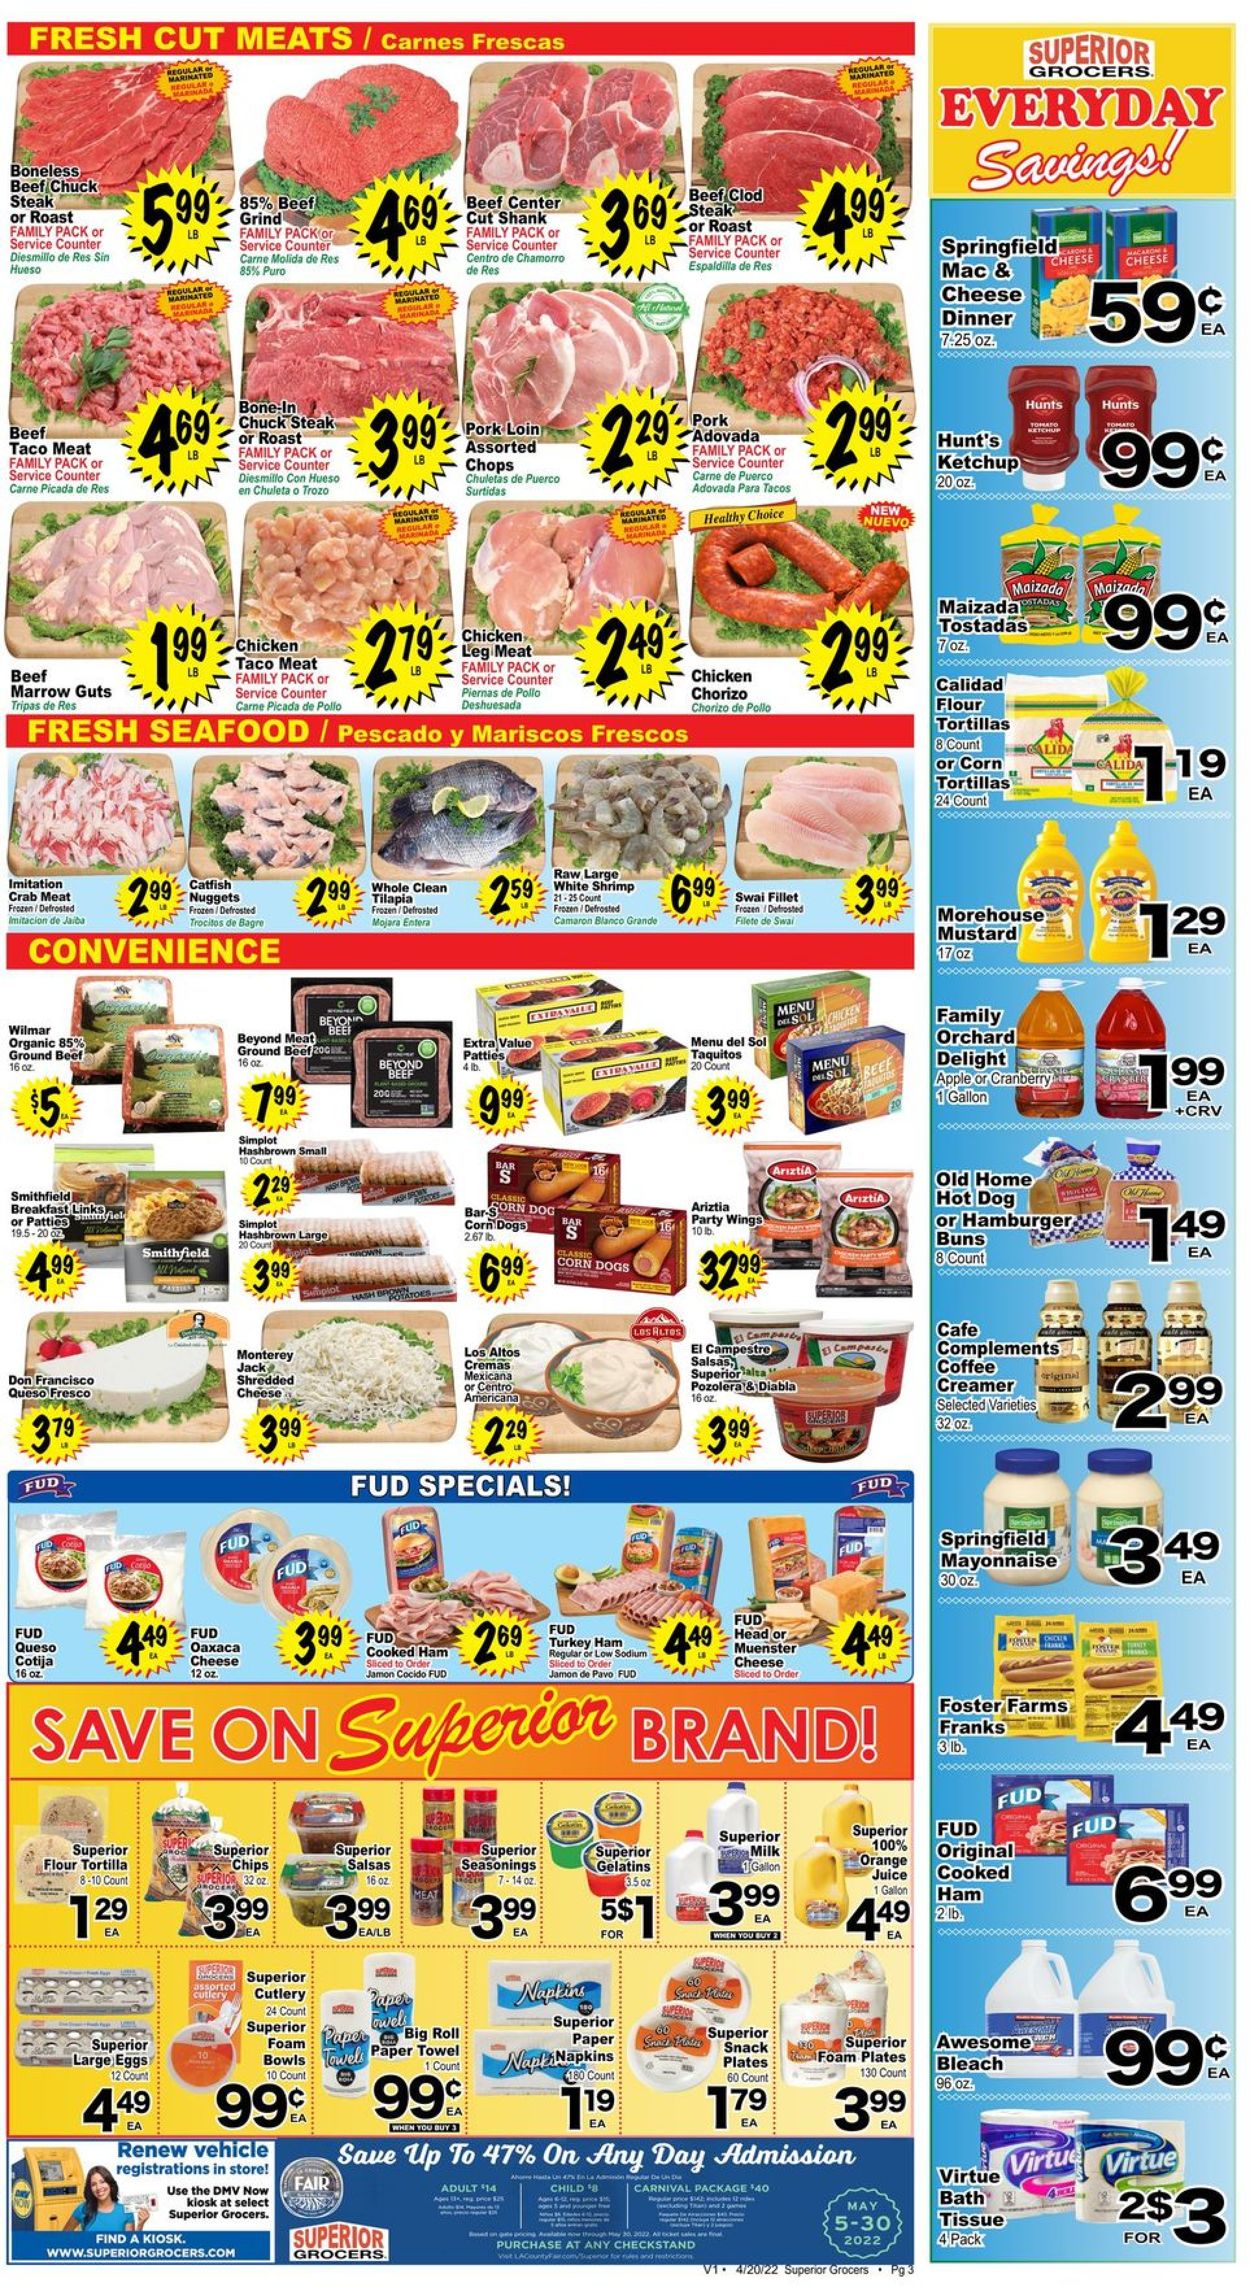 Superior Grocers Ad from 04/20/2022